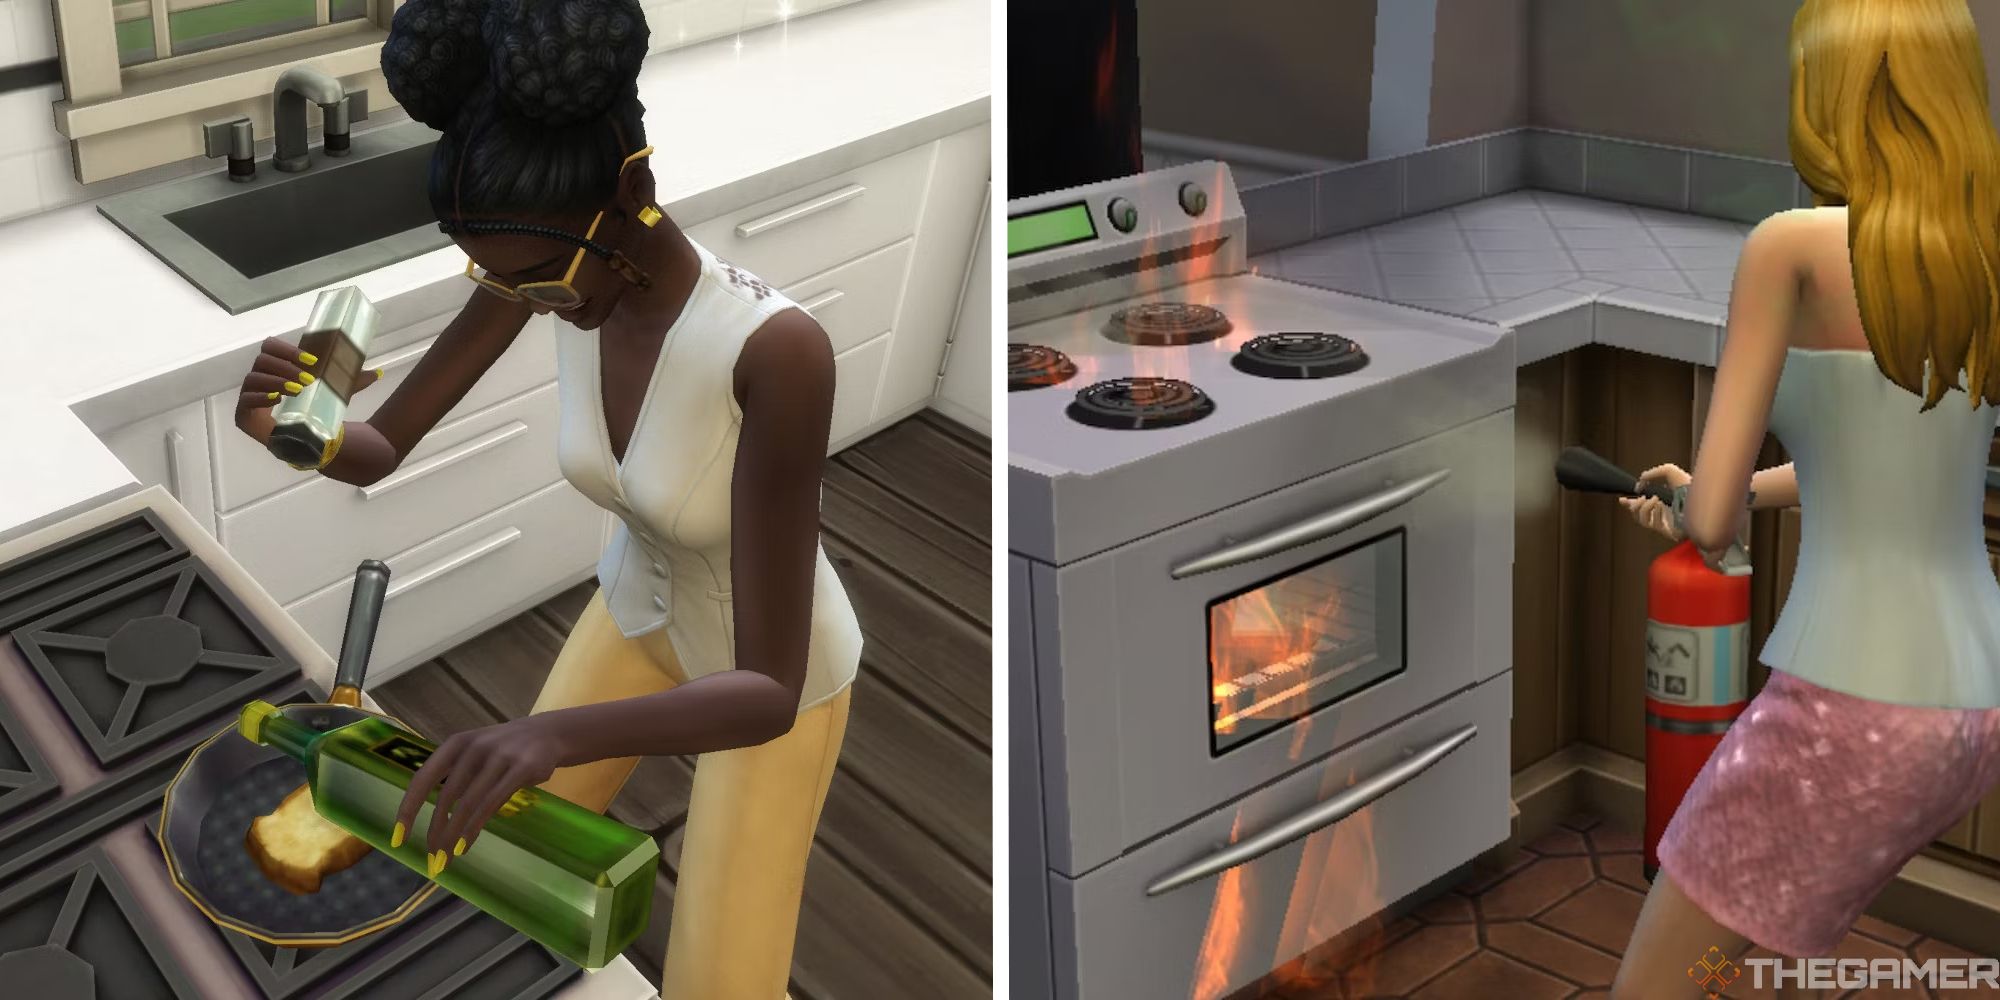 Sims 4 Gourmet Cooking Skill Cheat (How To Cheat To The Max!) - Let's Talk  Sims